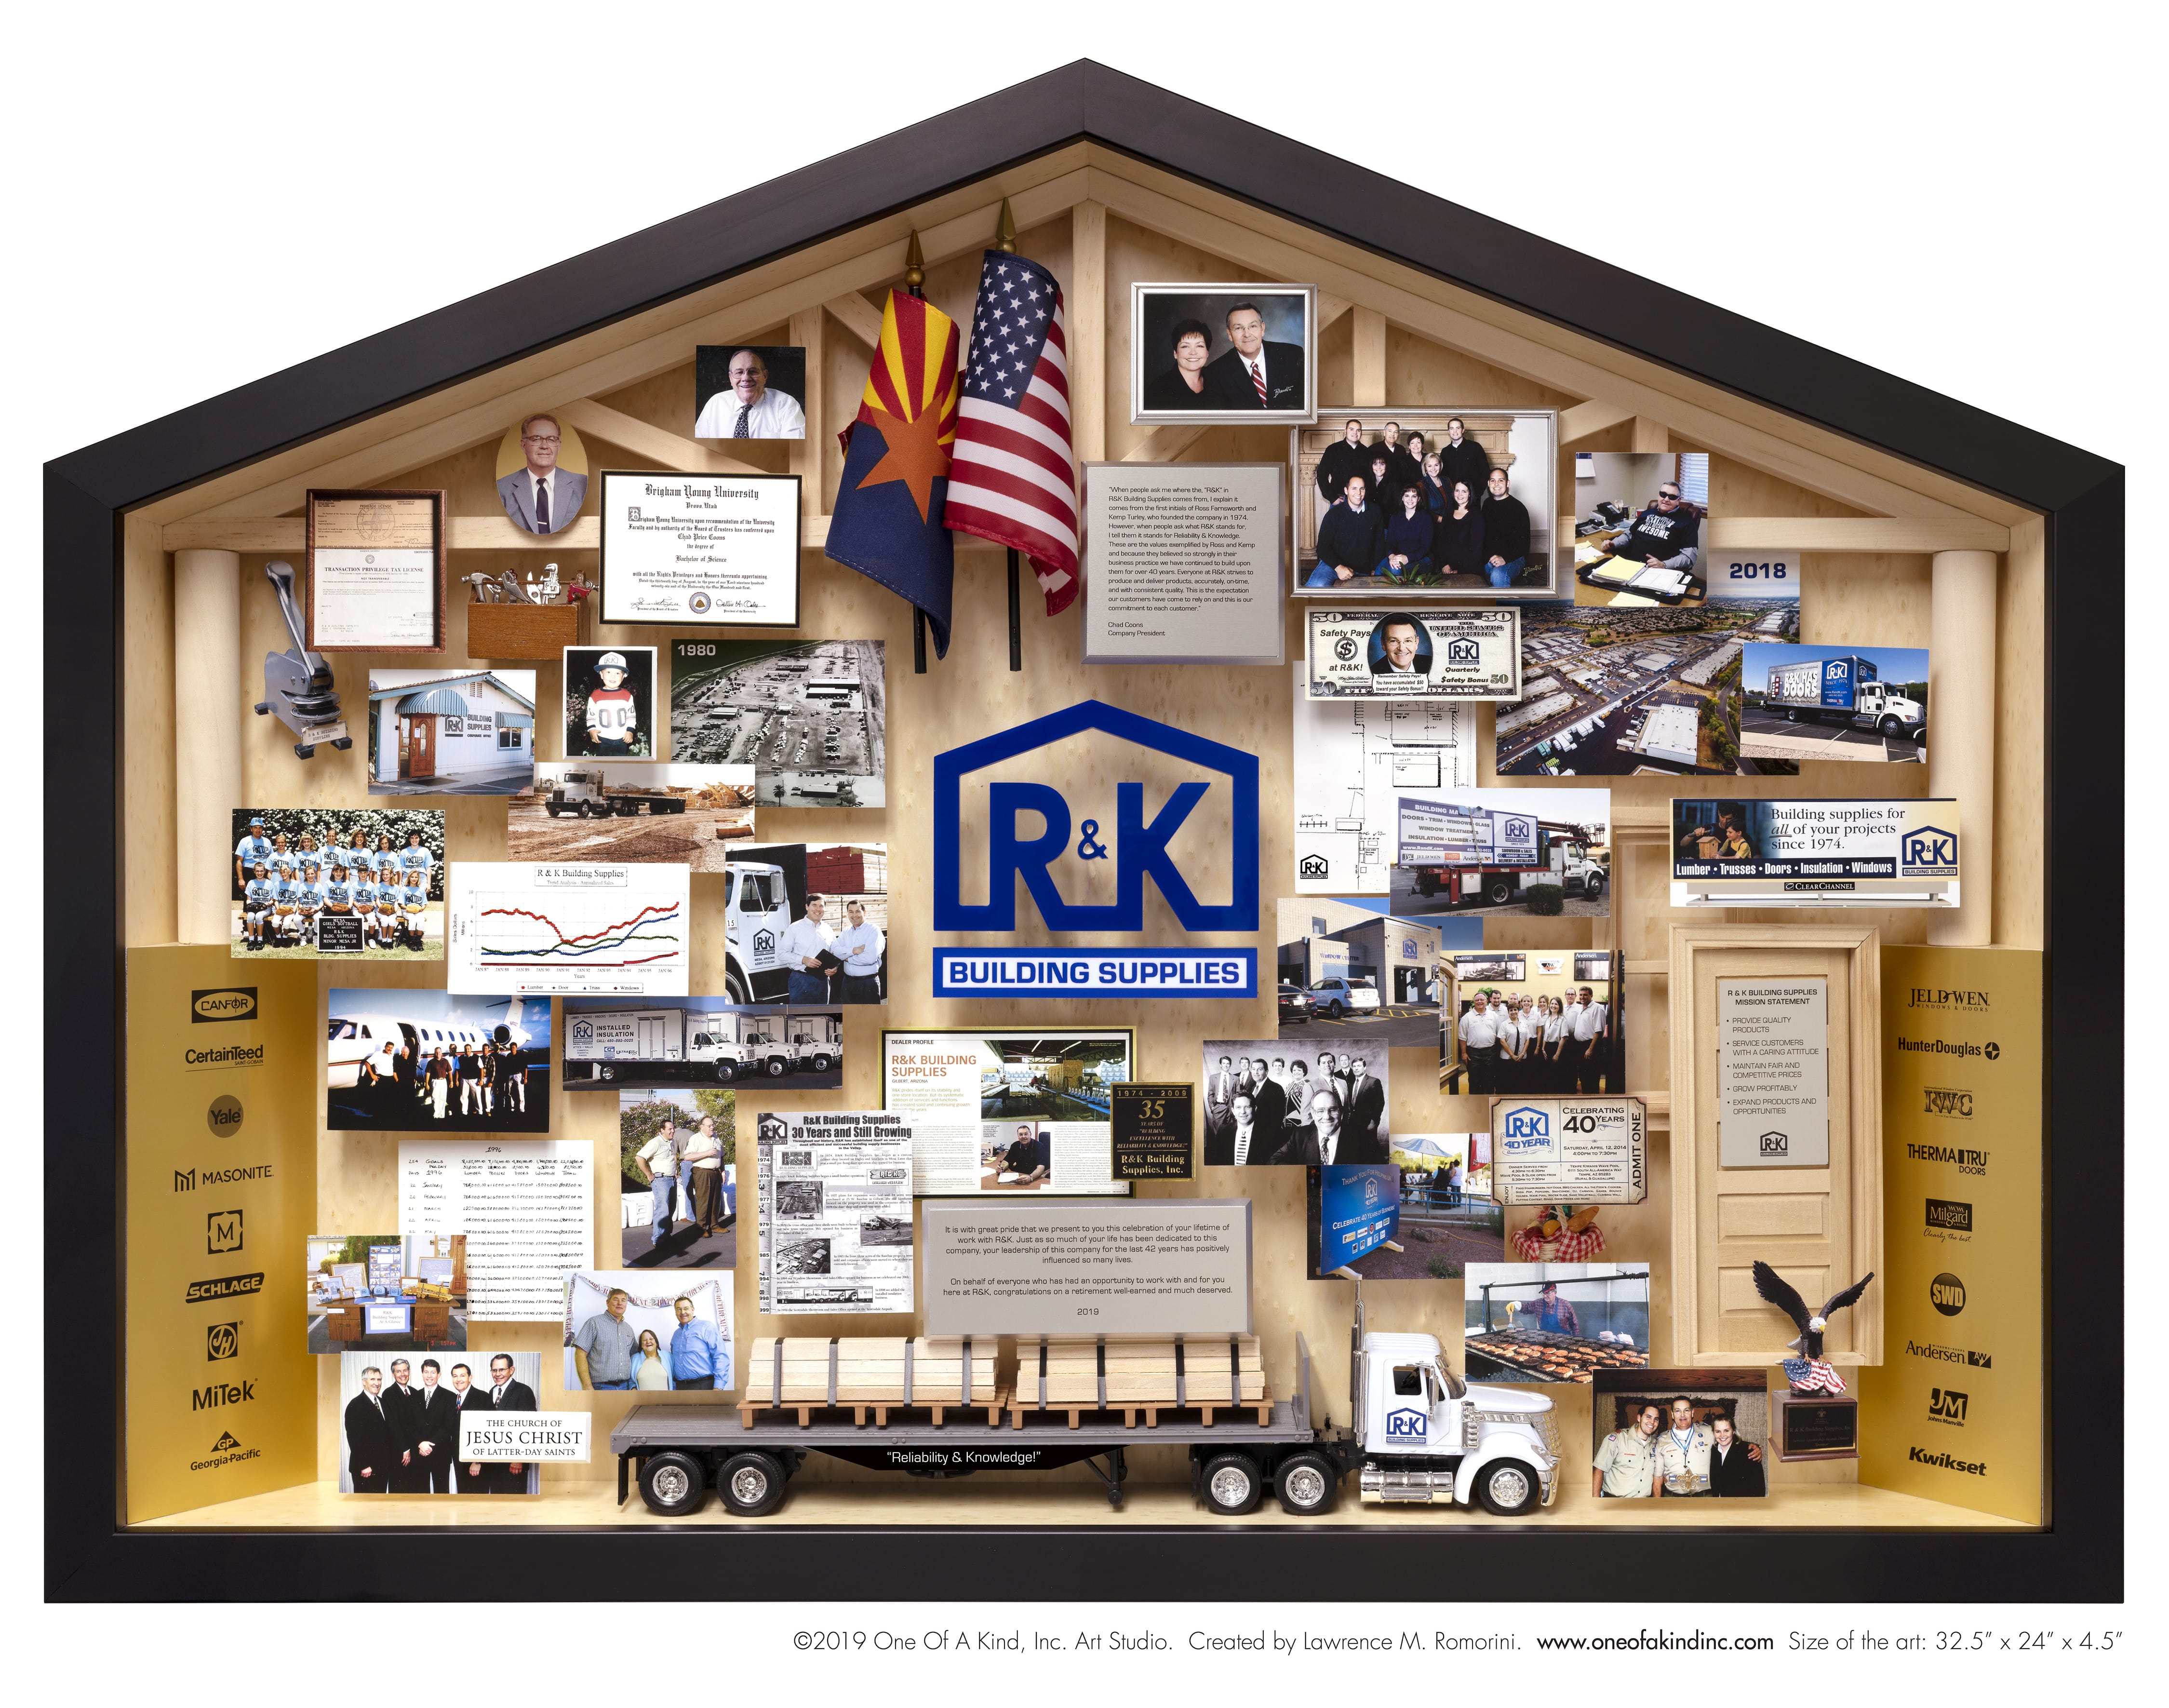 R&K Building Supplies | One of a Kind Art